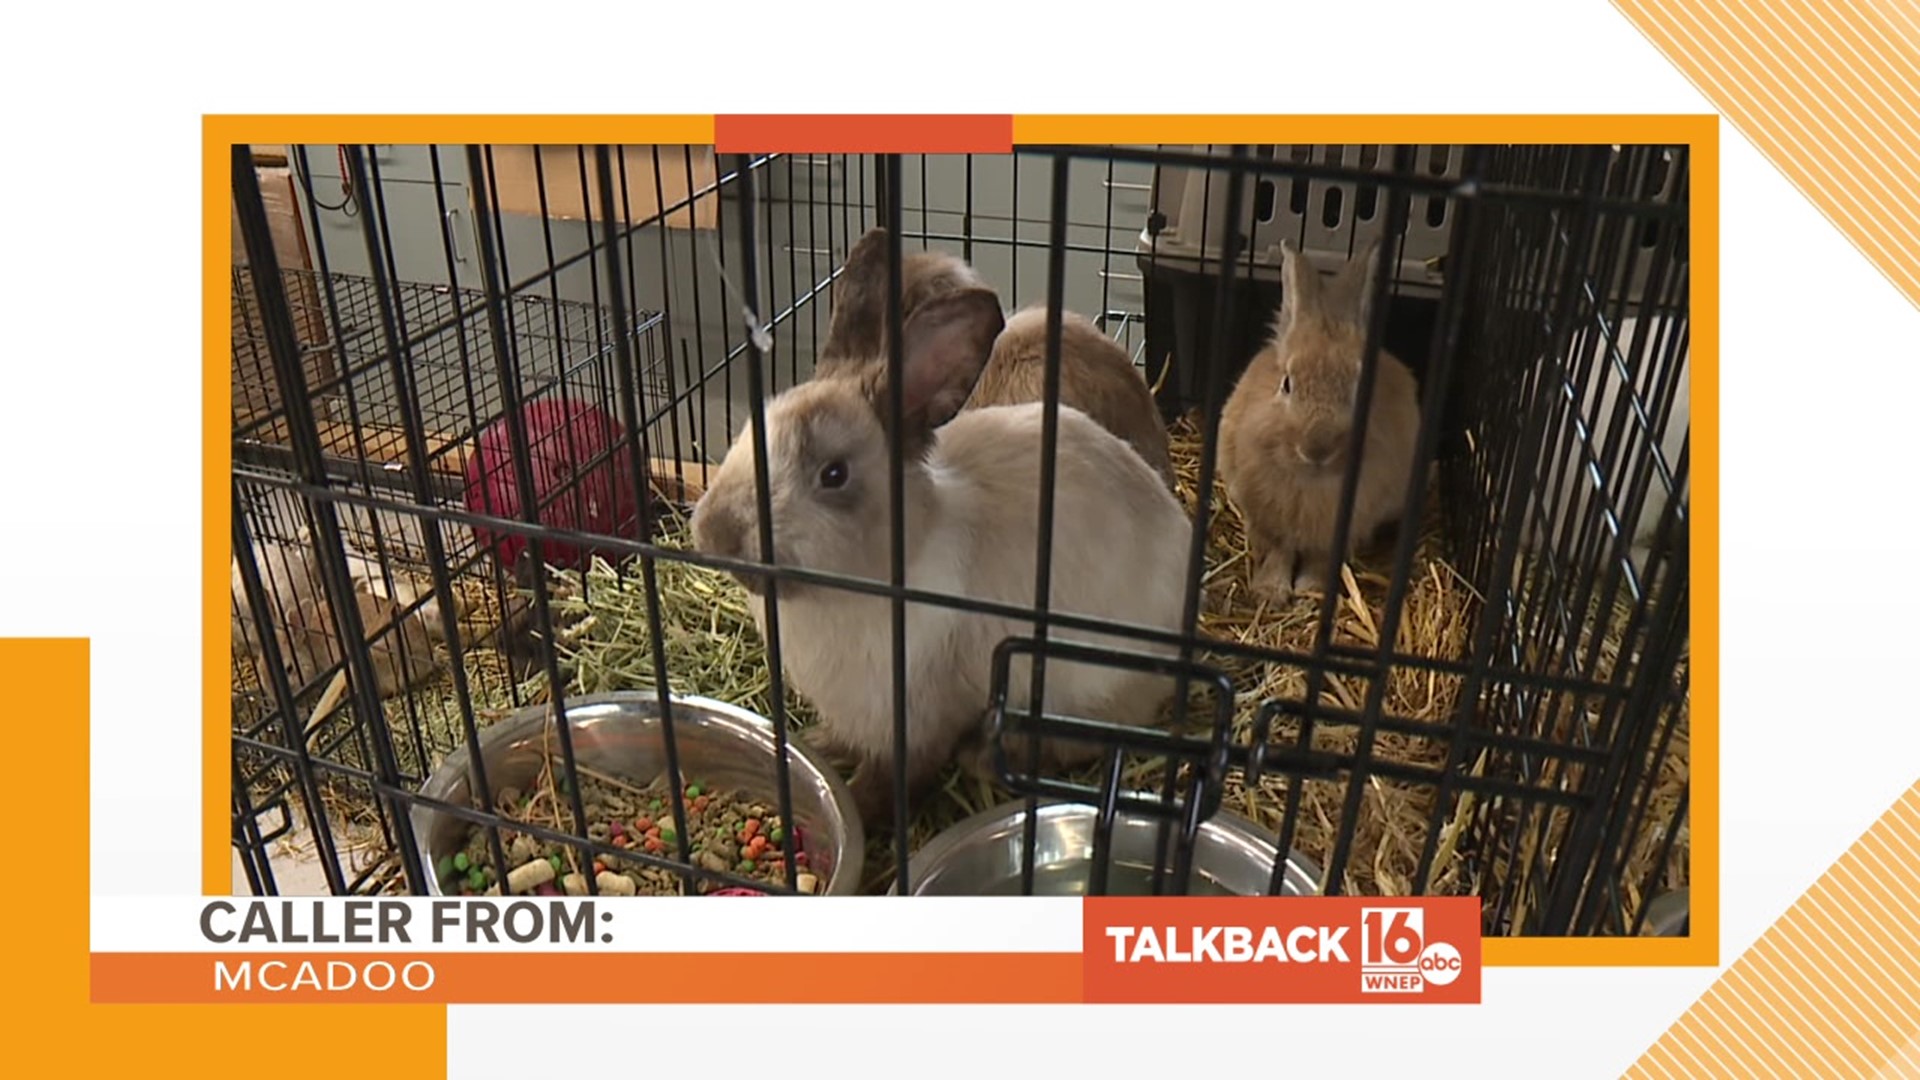 Three callers give their thoughts on nearly 200 rabbits rescued from a home near Moscow.